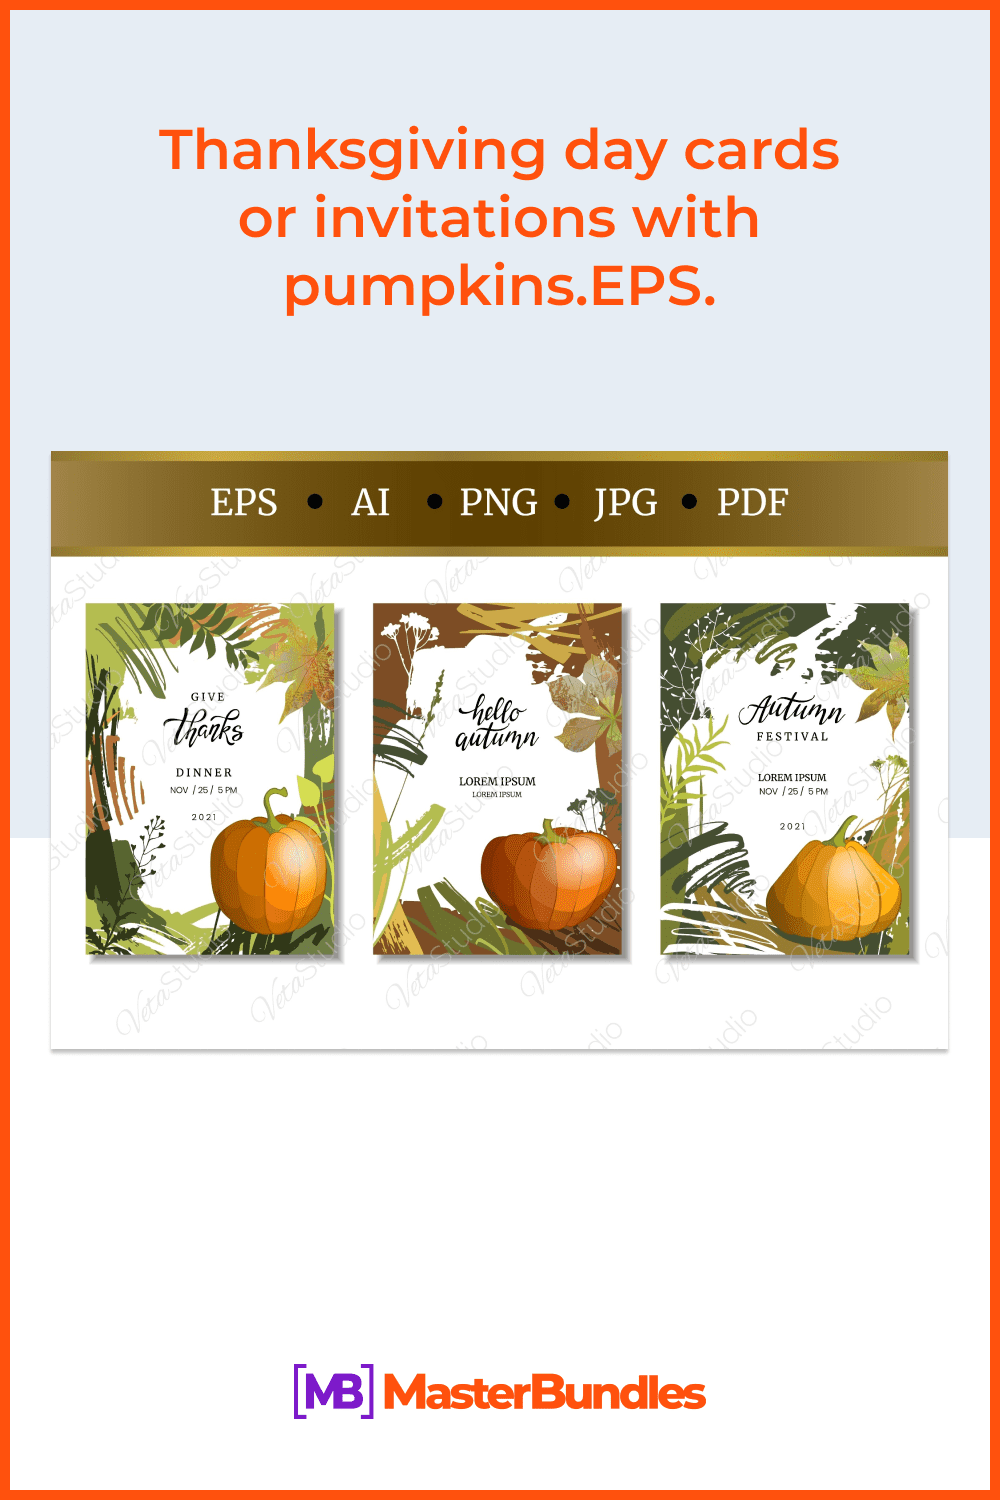 Thanksgiving day cards or invitations with pumpkins.